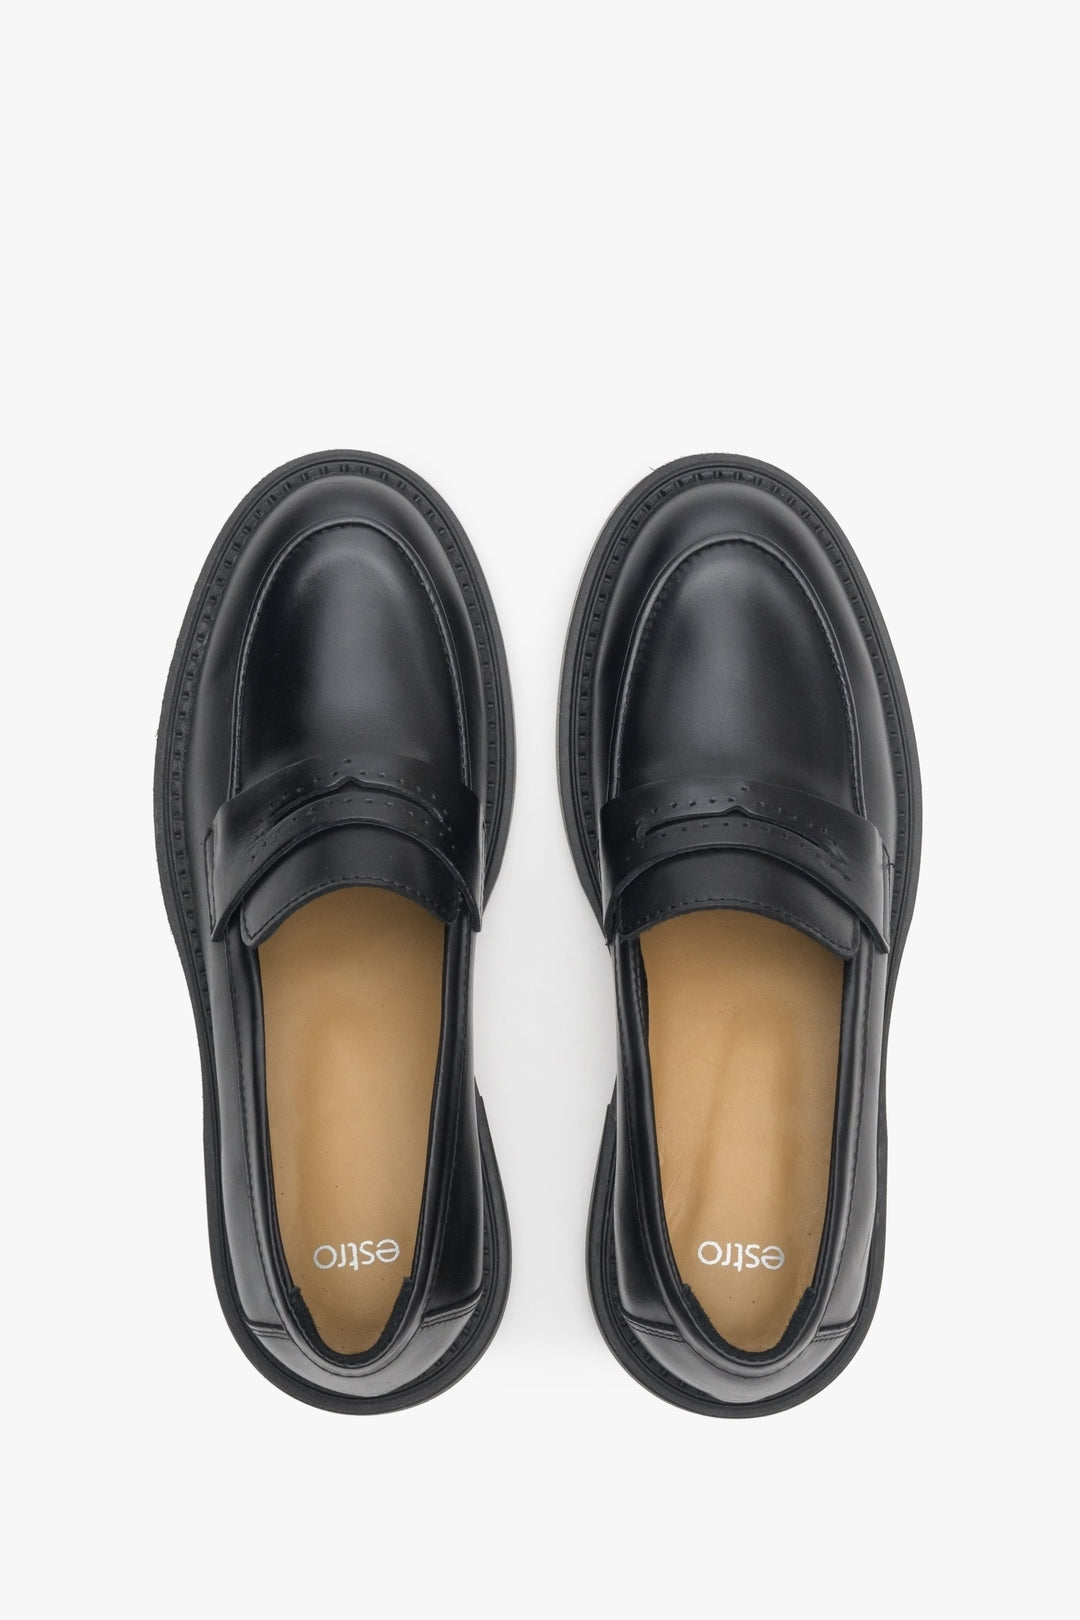 Black leather loafers for women Estro - presentation of the model from above.